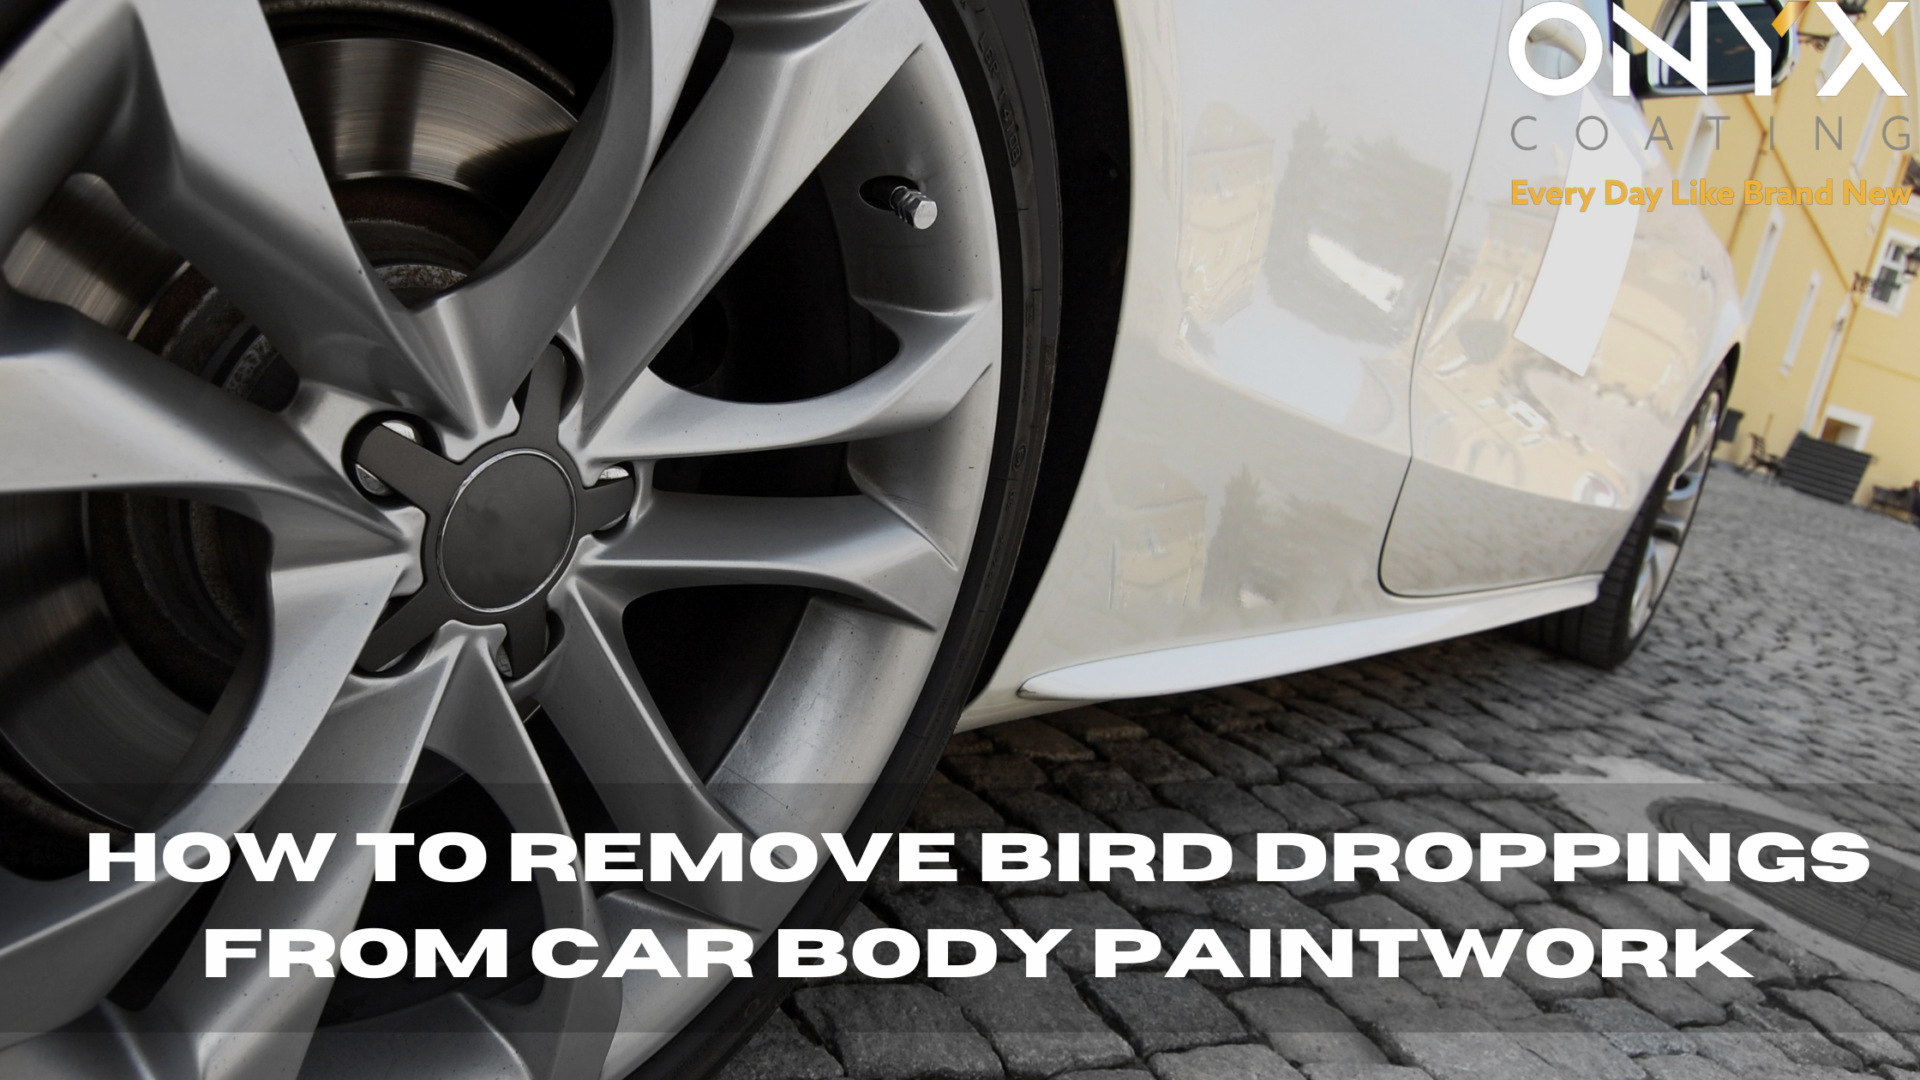 How to remove bird droppings from car body paintwork